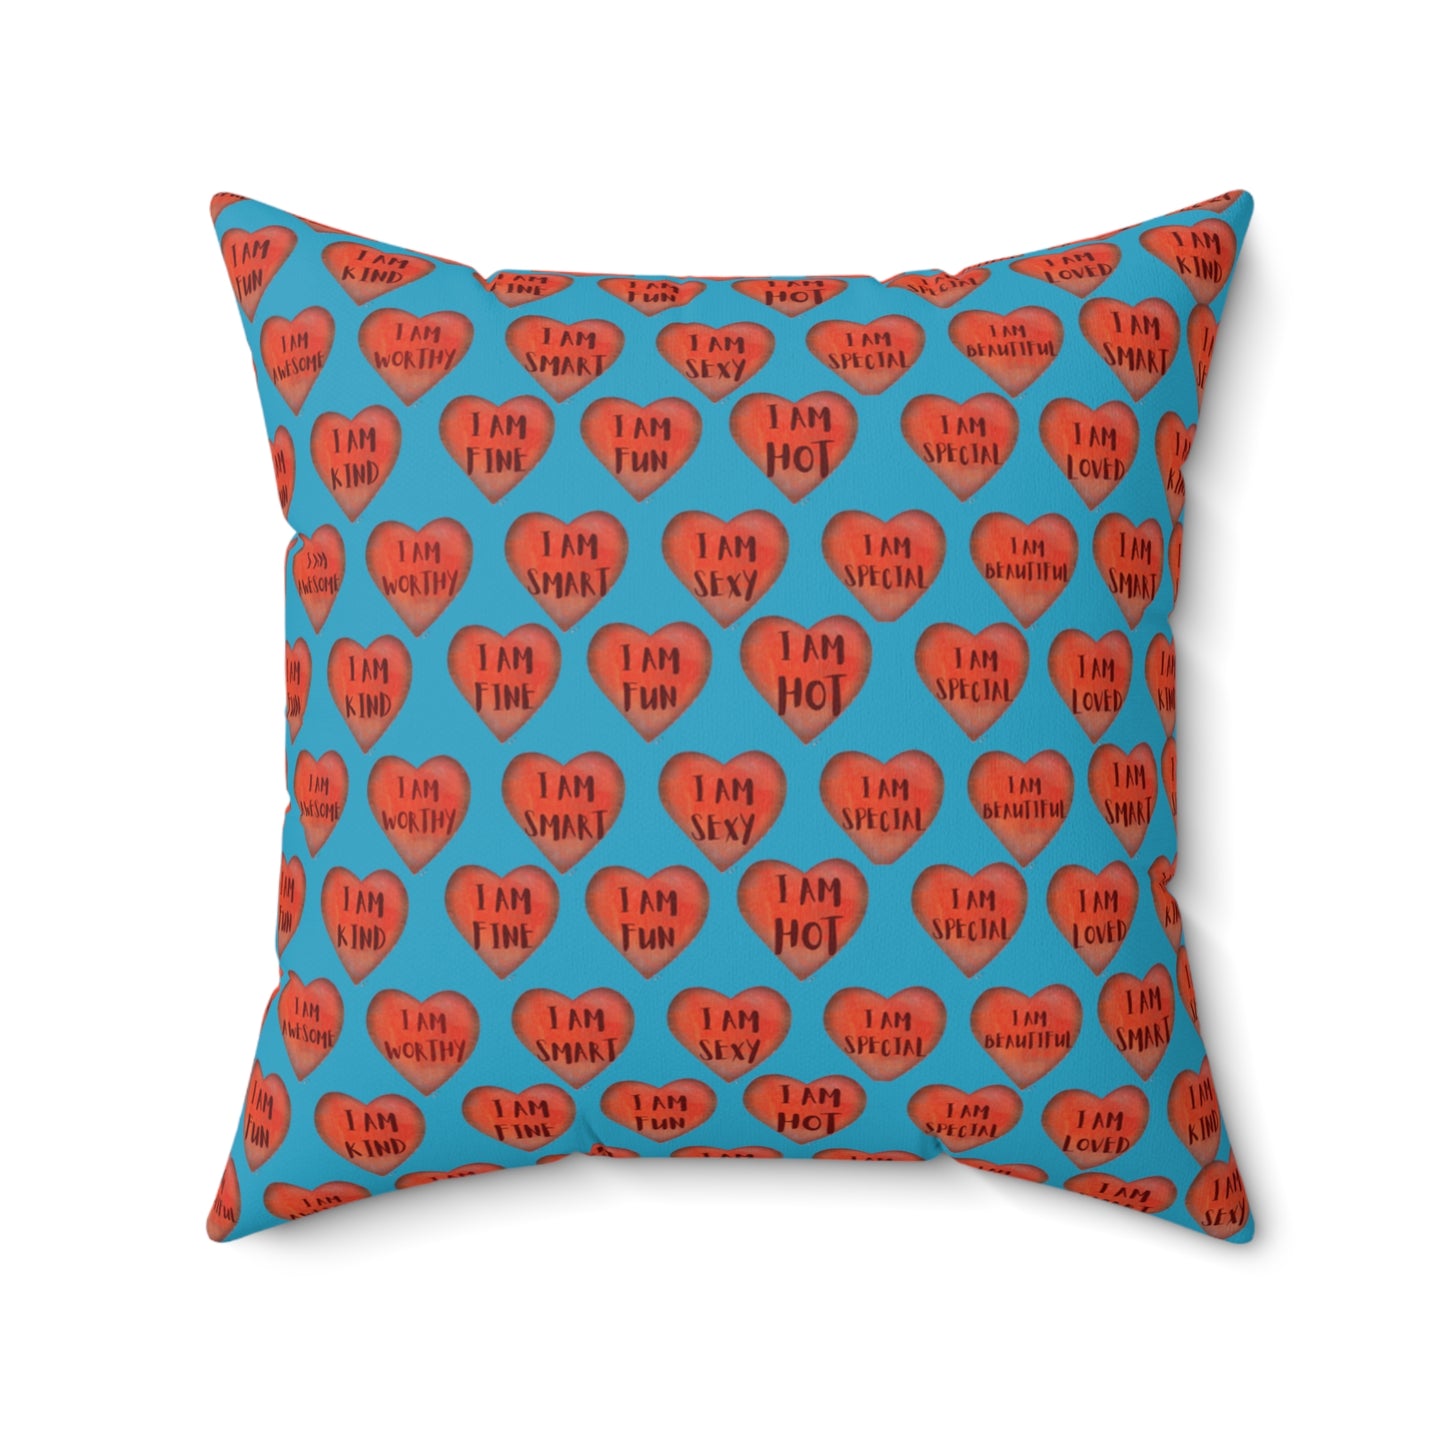 Colorful Faux Suede Pillow - Red Heart motivational pillow - Turquoise Throw Pillow - Inspirational Decorative pillow